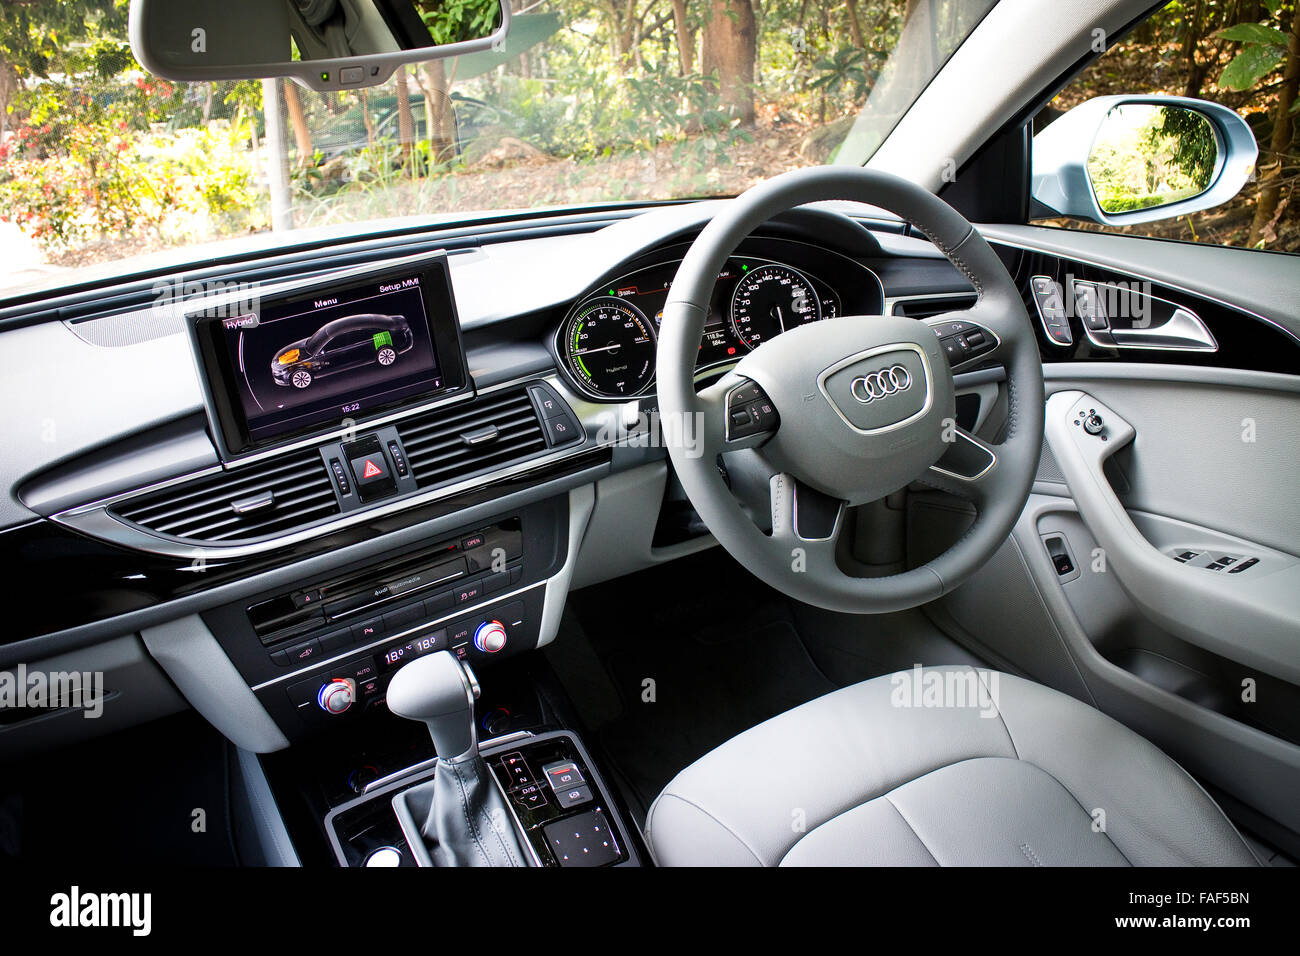 Confine Summon head teacher Hong Kong, China March 17, 2014 : Audi A6 hybrid interior on March 17 2014  in Hong Kong Stock Photo - Alamy